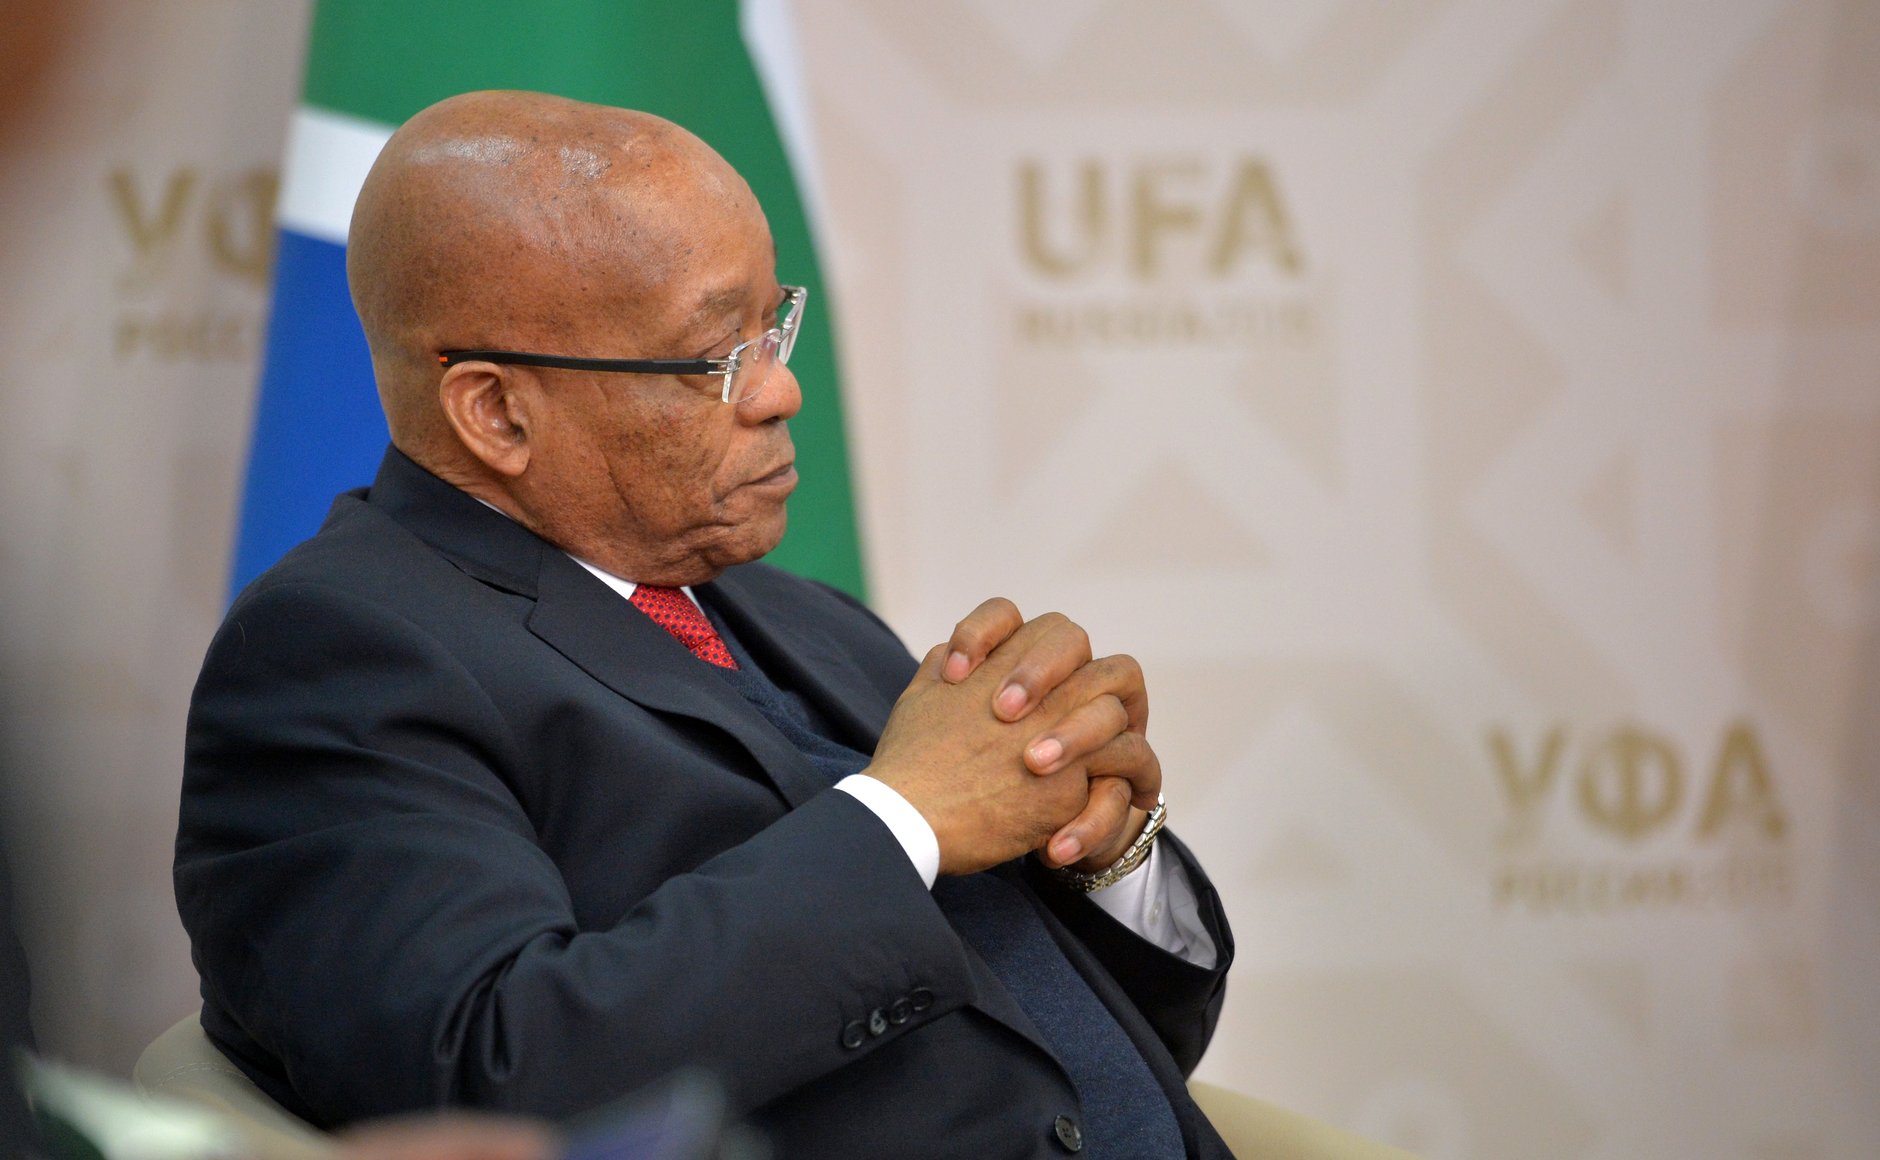 South Africa court dismisses plea to remove prosecutor from Zuma corruption trial